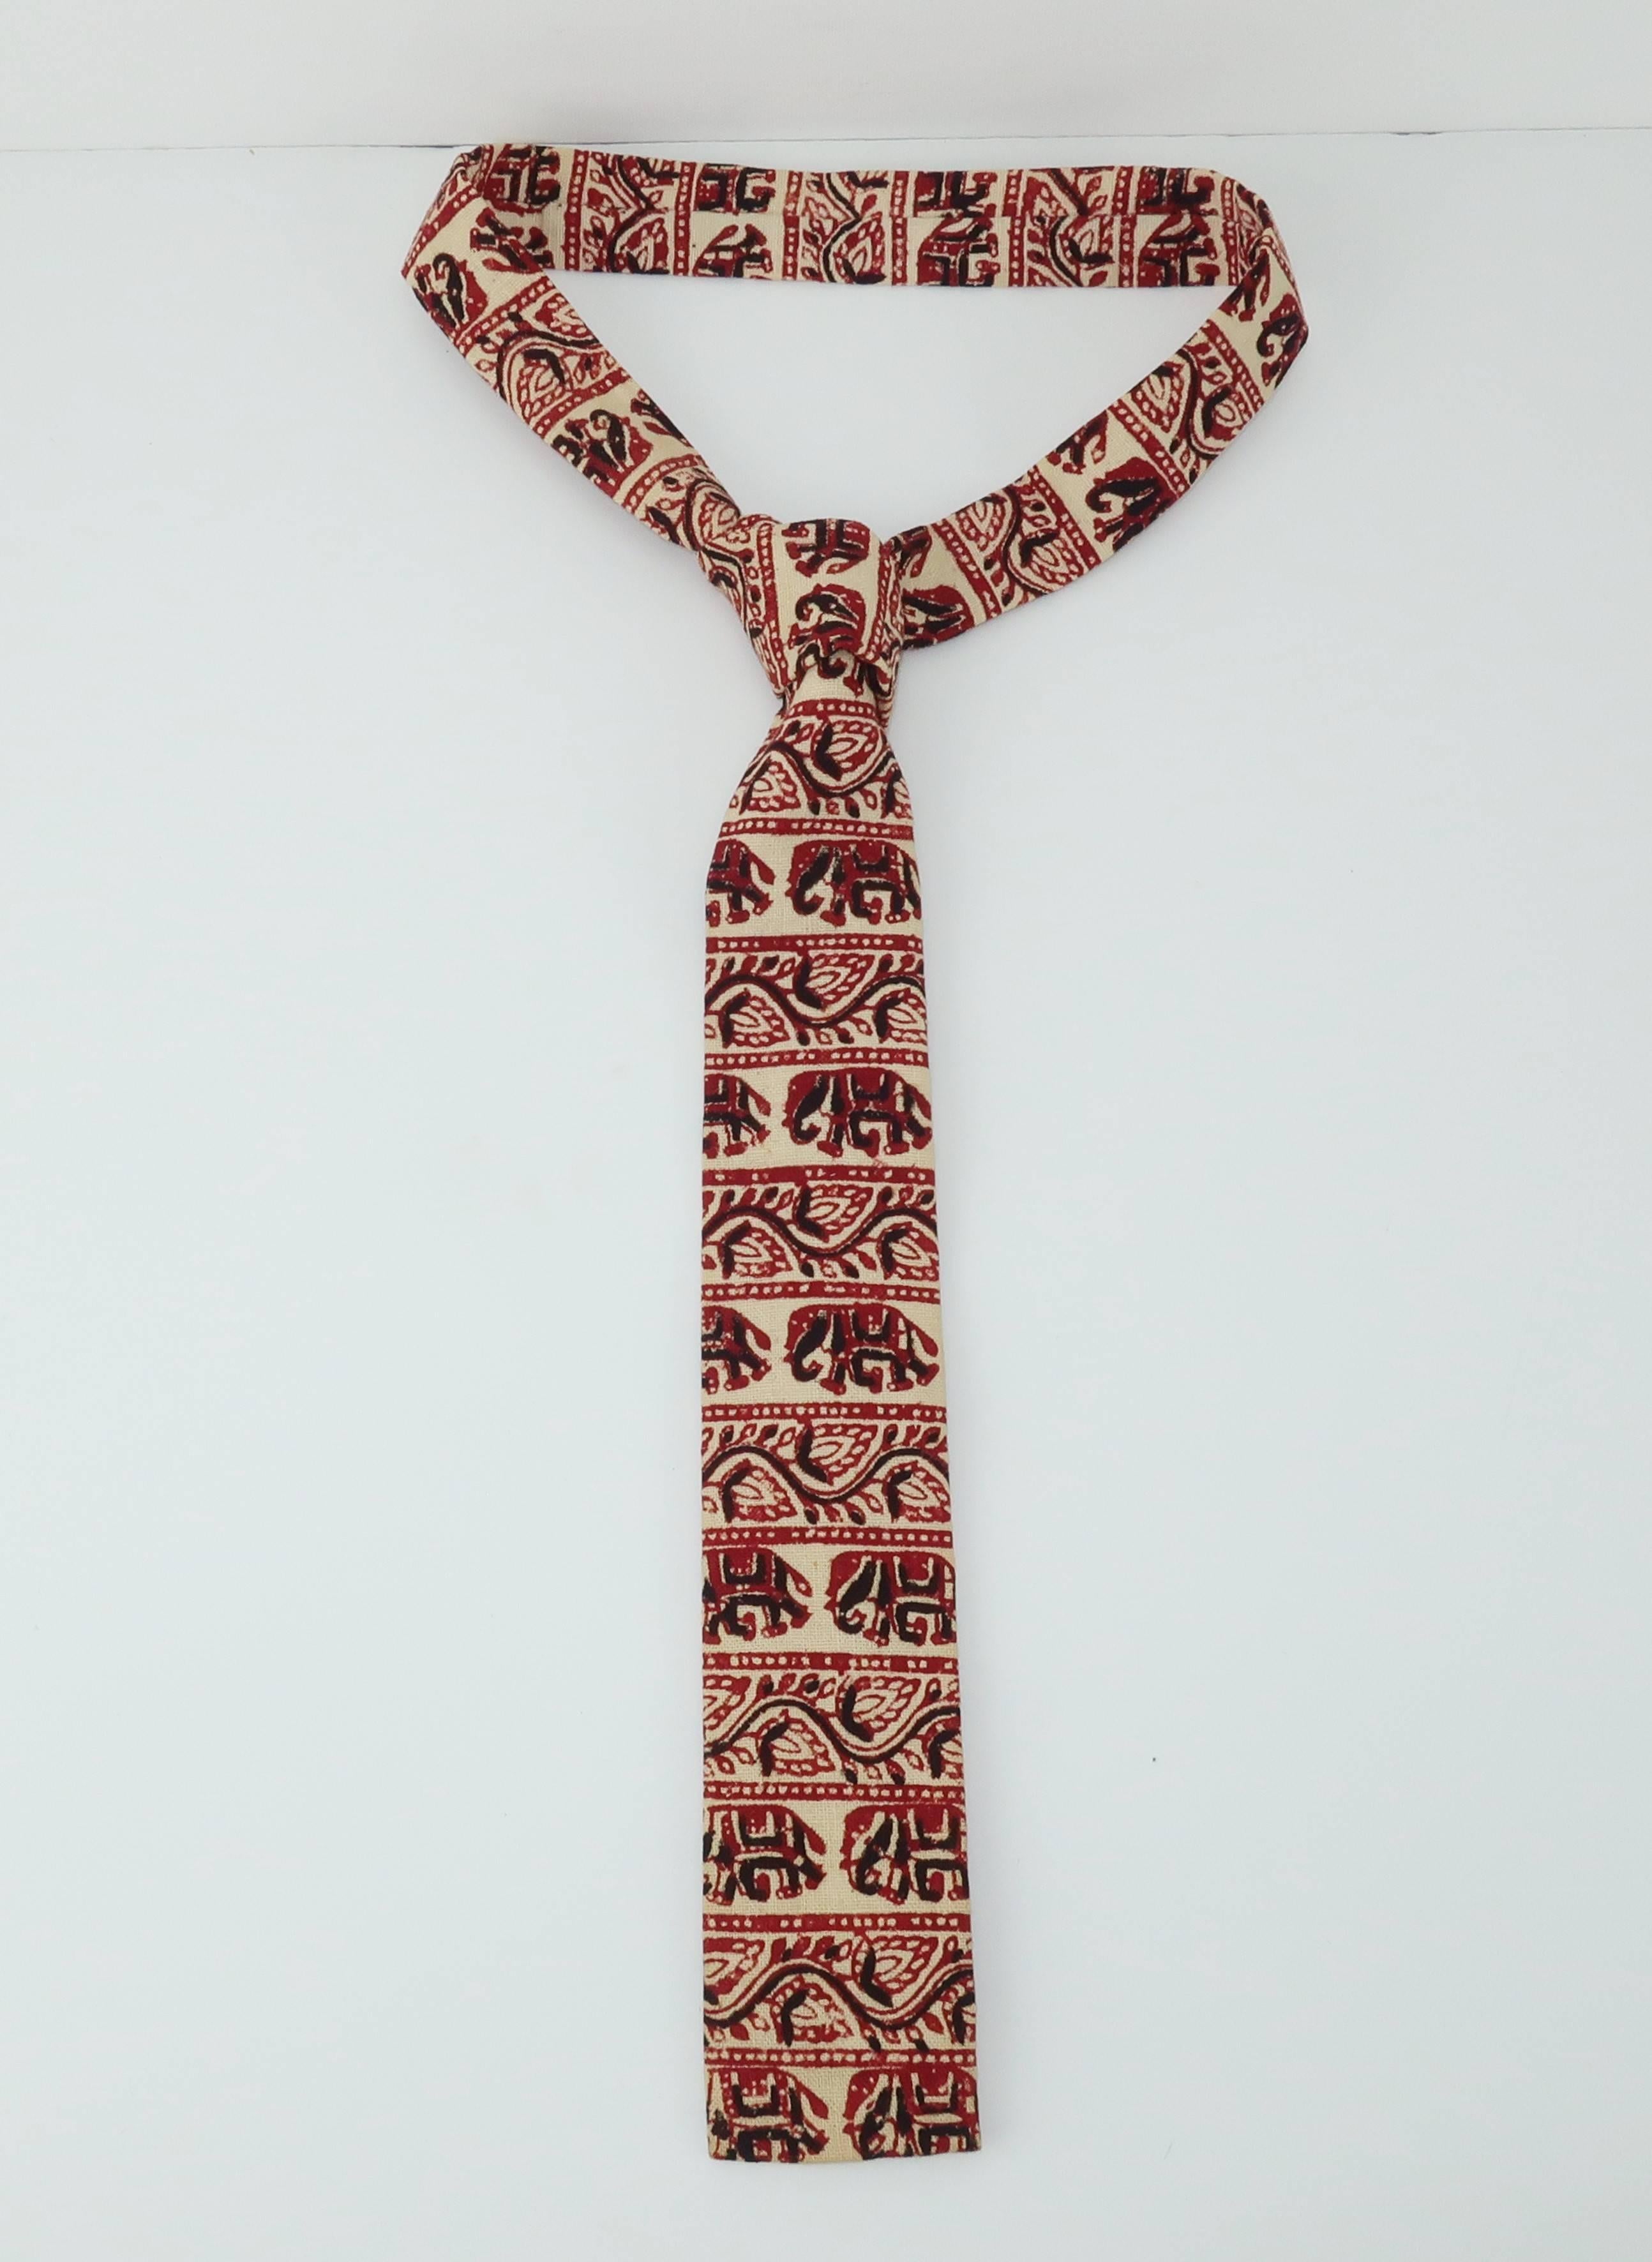 The novelty necktie can be the perfect accessory for a gentleman with a sense of humor and an eye for whimsy. This 1960's skinny square tie by Tucker Ties is designed with hand blocked Indian fabric.  The natural white background is accented in